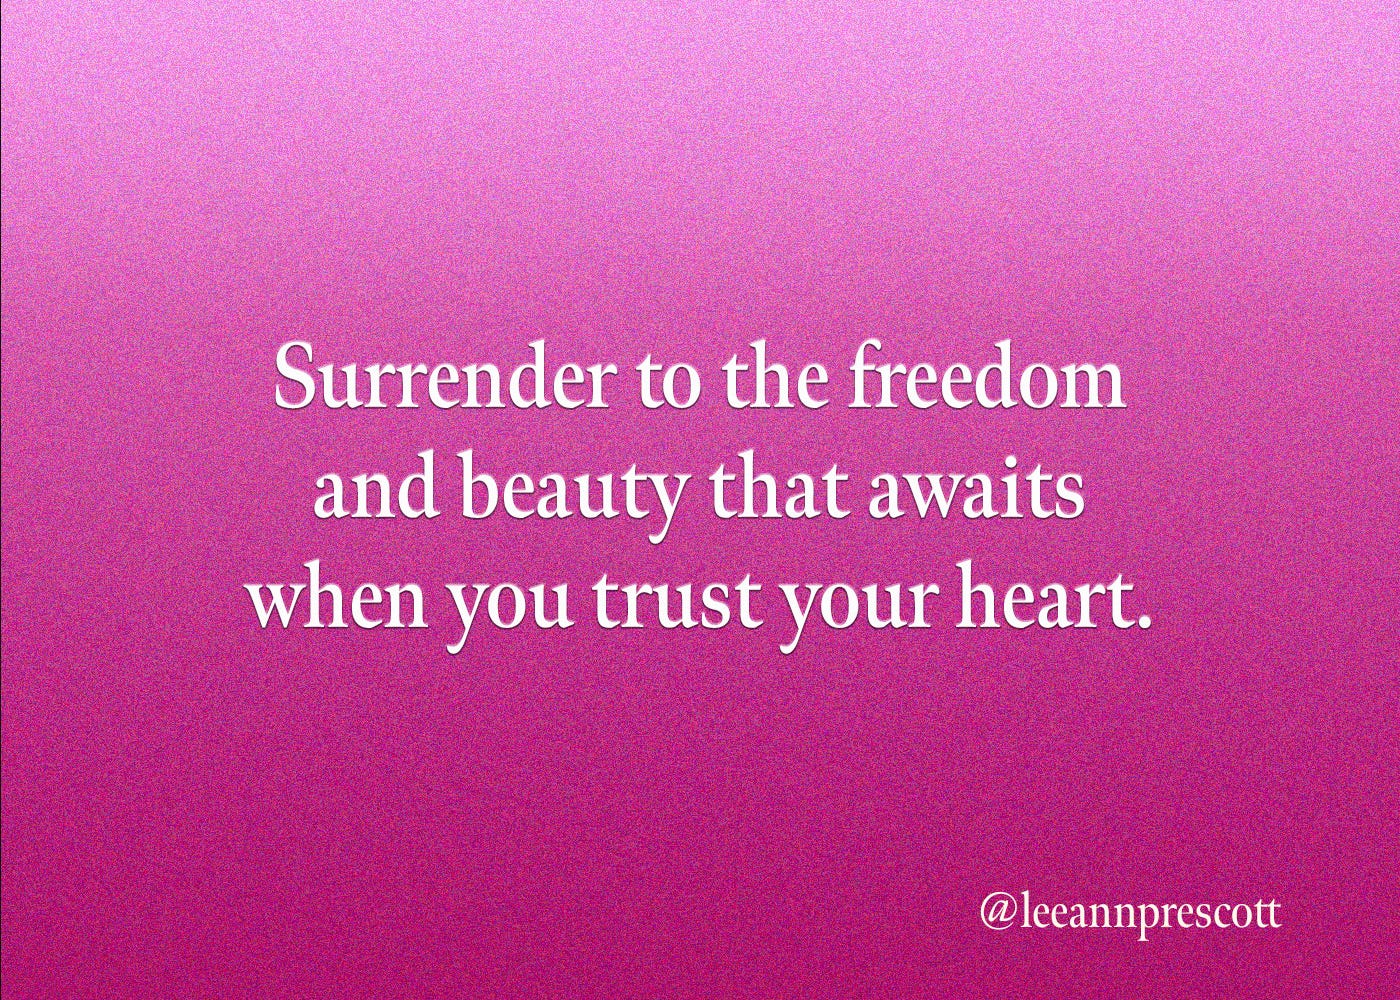 Surrender to the freedom and beauty that awaits when you trust your heart.